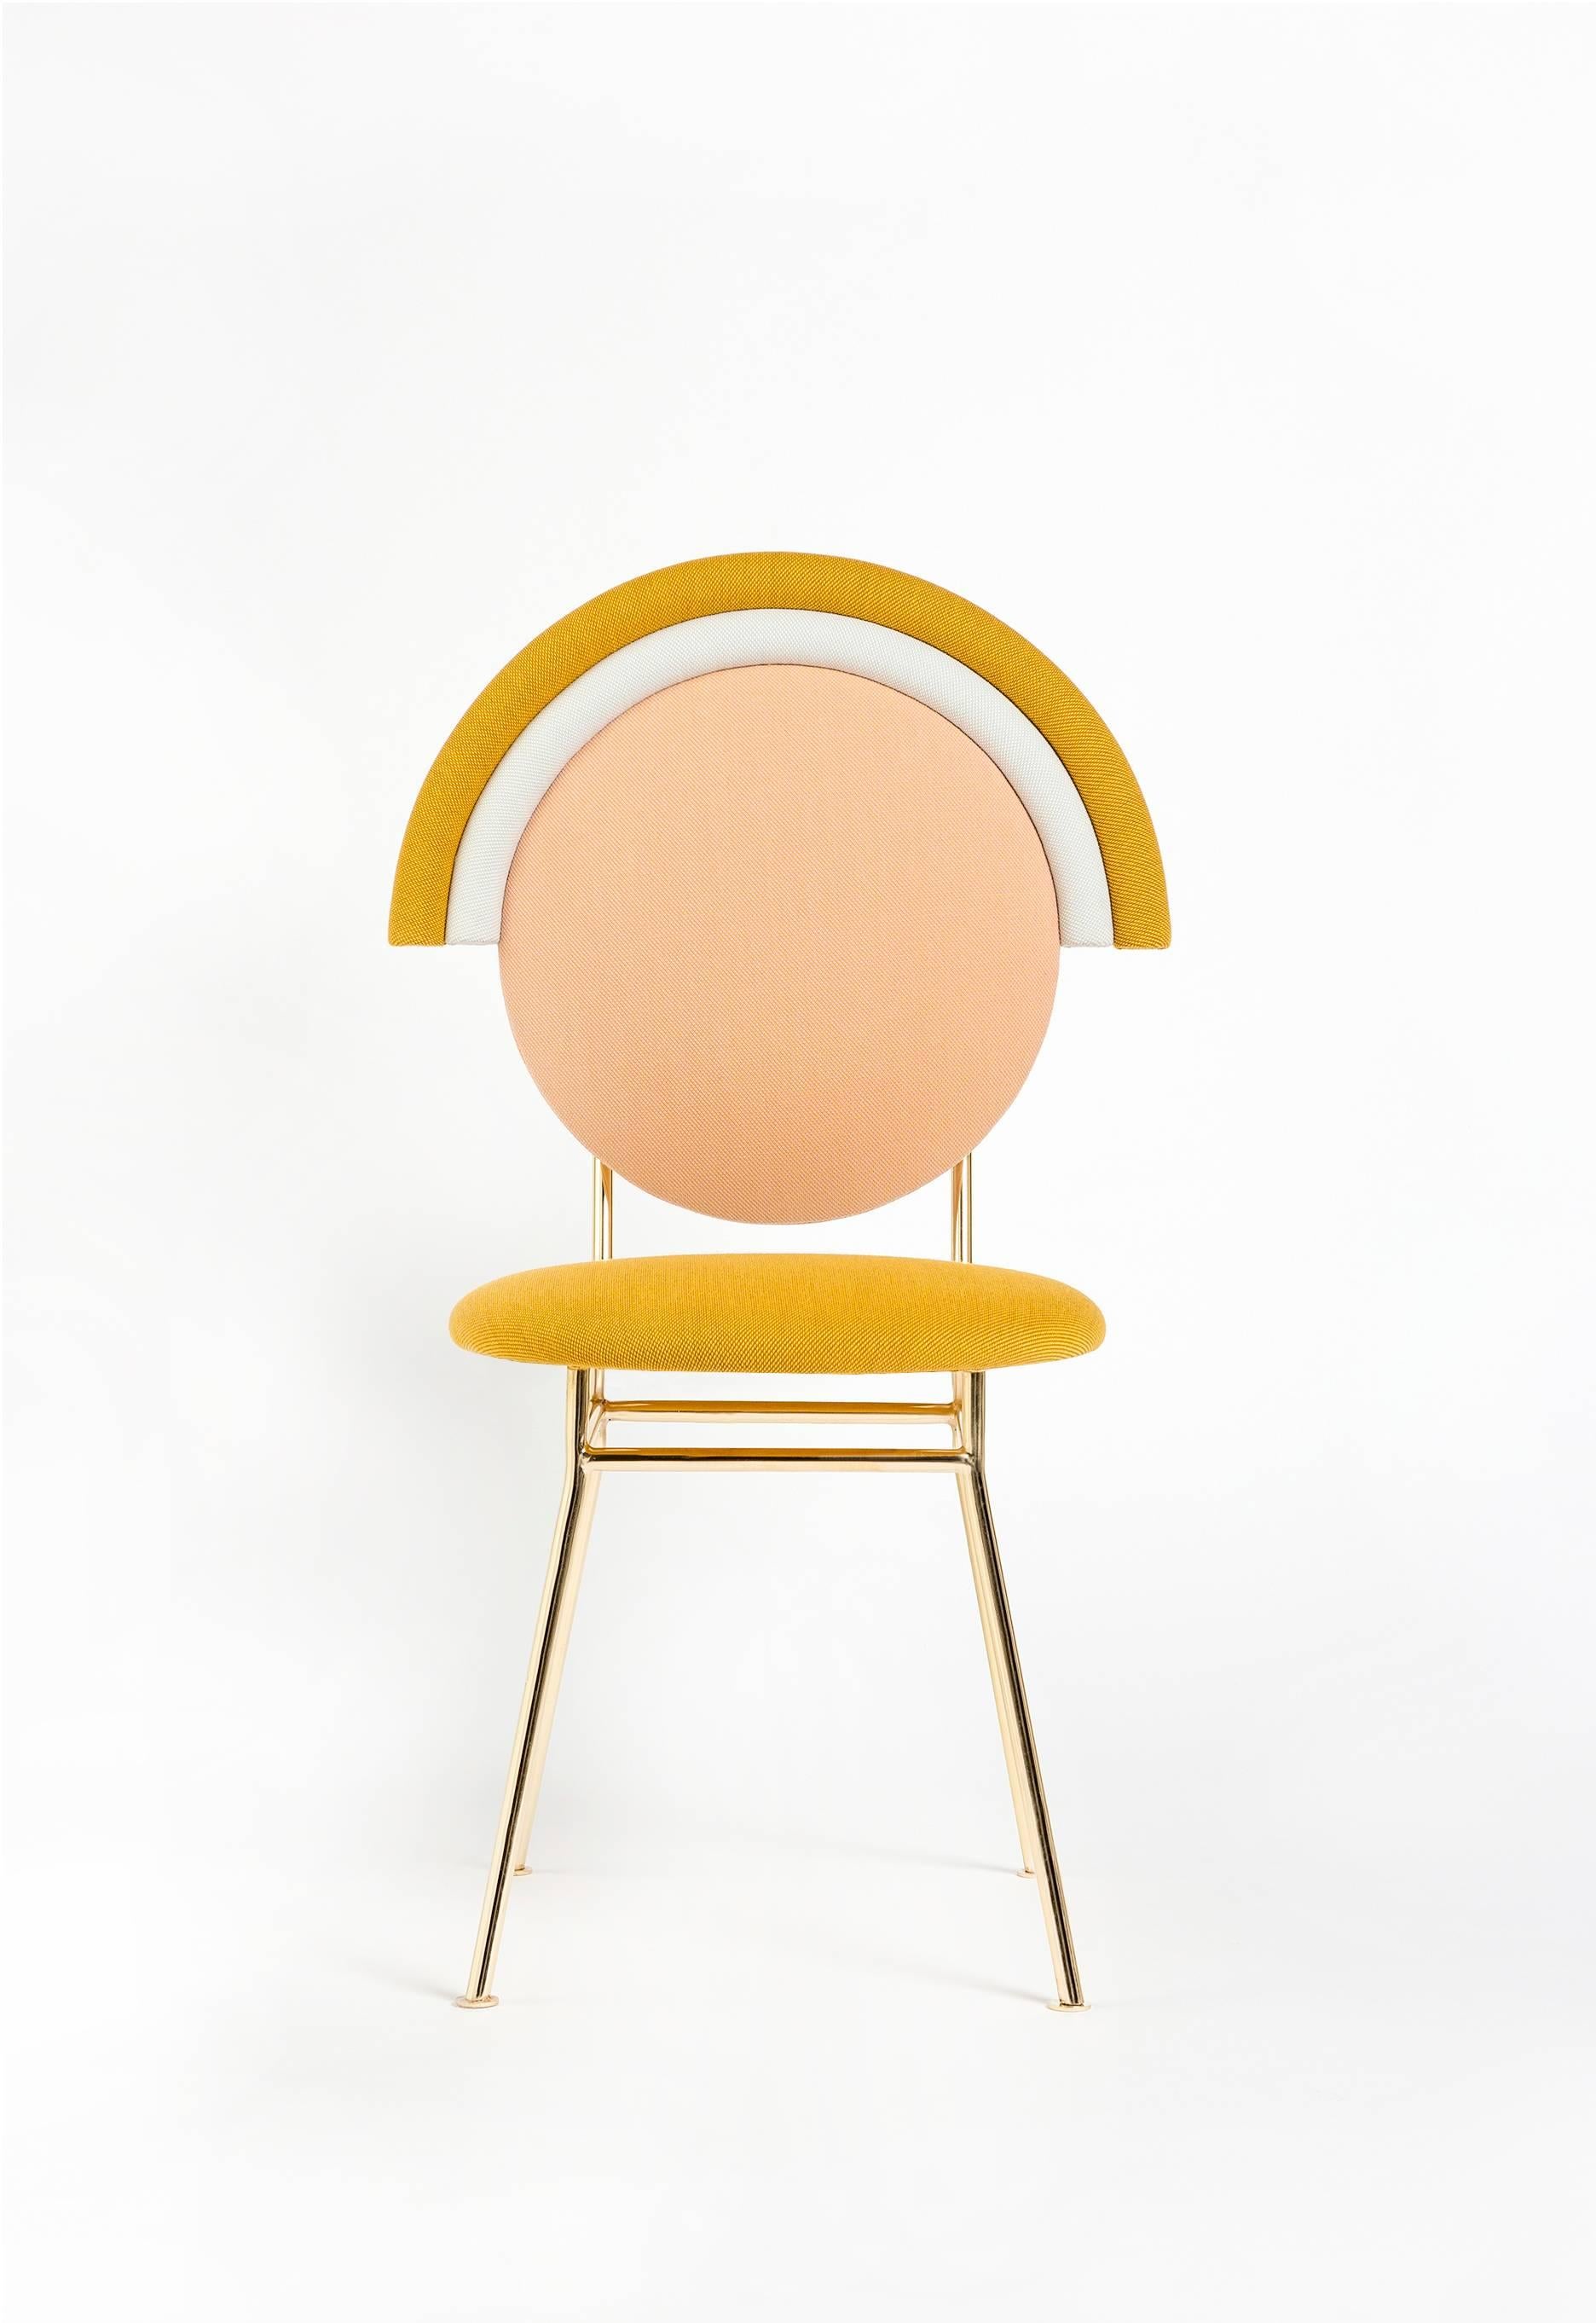 In Greek mythology, Iris is the personification of the rainbow and messenger of the gods. Inspired by this rainbow, it is a combination of layers and intentions. This minimal and elegant geometrical shaped chair can fit to any environment thanks to